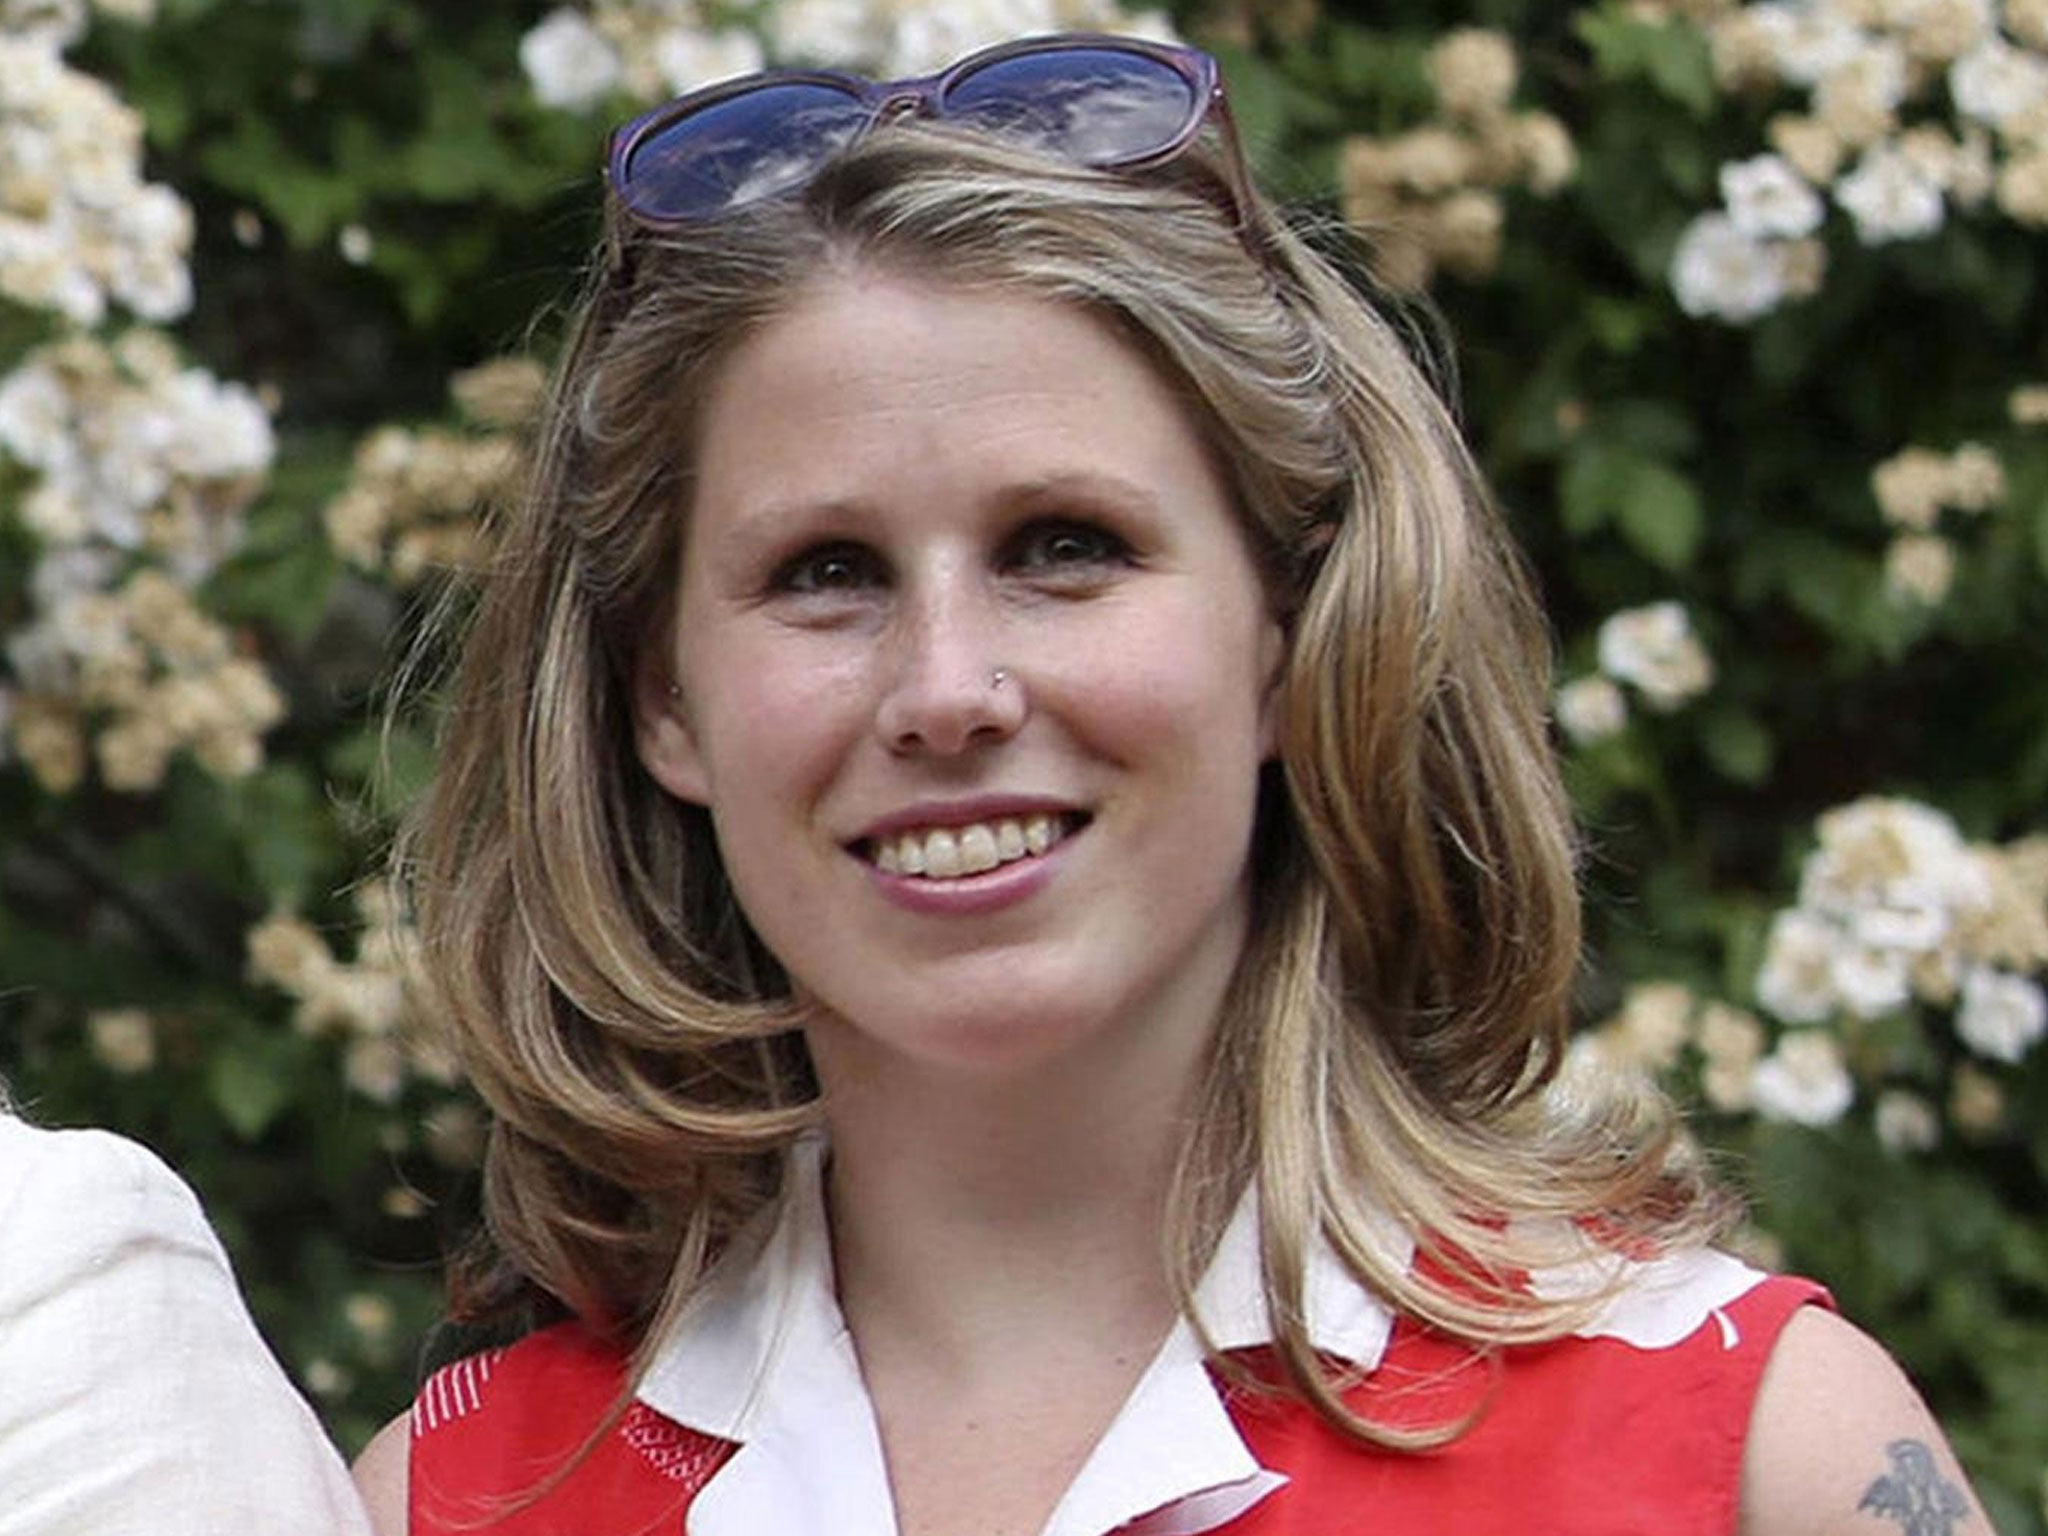 The Crown Prosecution Service has said that a man and a woman will be charged with improper use of a communications network in relation to tweets to Caroline Criado-Perez